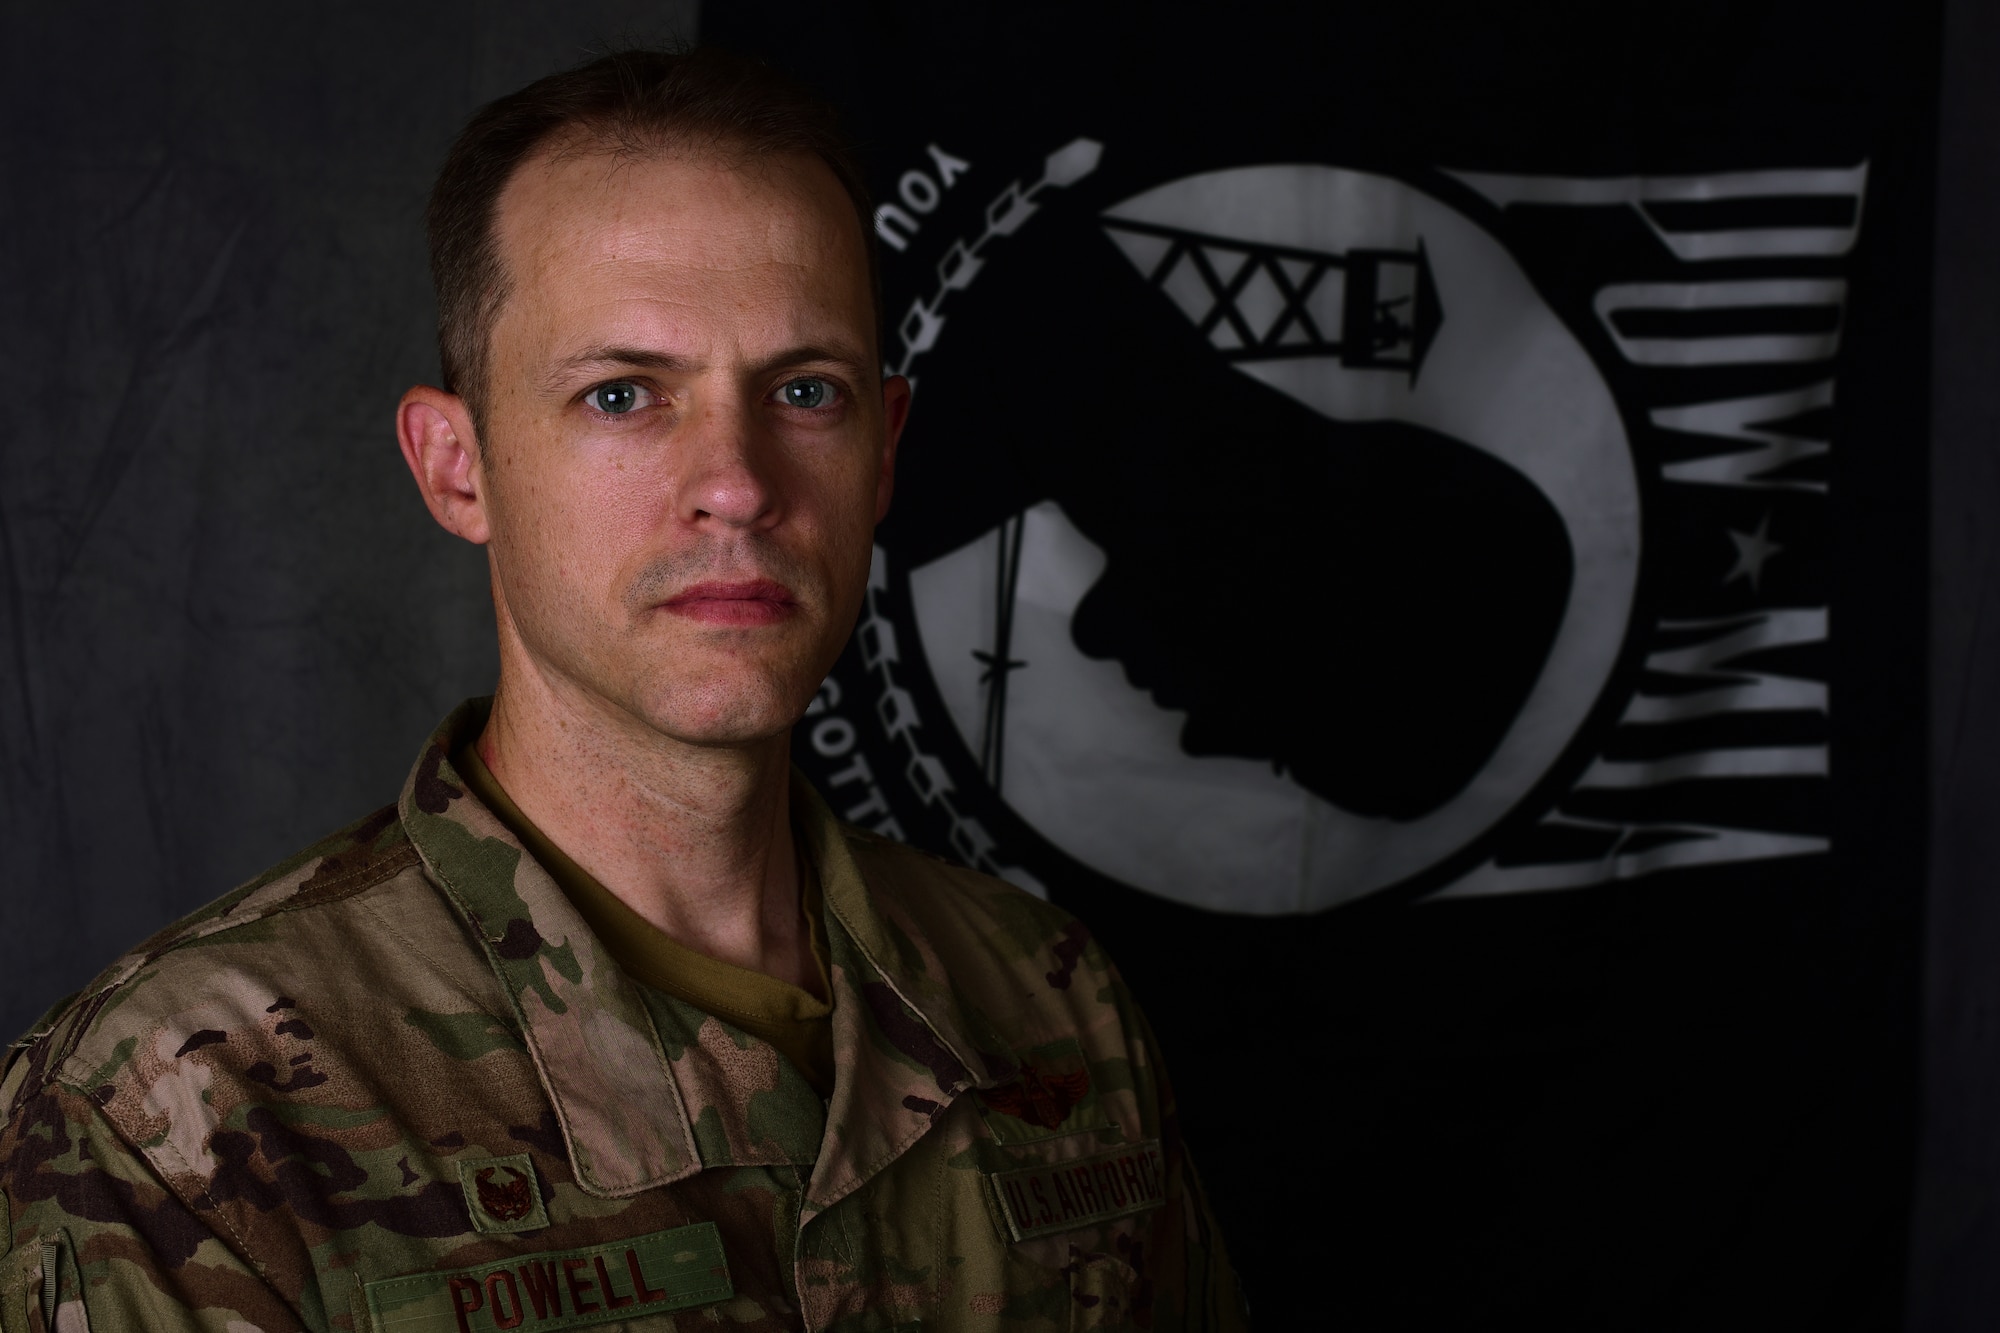 U.S. Air Force Lt. Col. Powell, 387th Air Expeditionary Squadron commander, poses for a portrait at an undisclosed location in Southwest Asia, Sept. 21, 2018. National POW/MIA Recognition Day is held each year on Sept. 21. There are currently more than 82,000 Americans missing from past conflicts dating back to World War II. (U.S. Air Force photo by Staff Sgt. Christopher Stoltz)